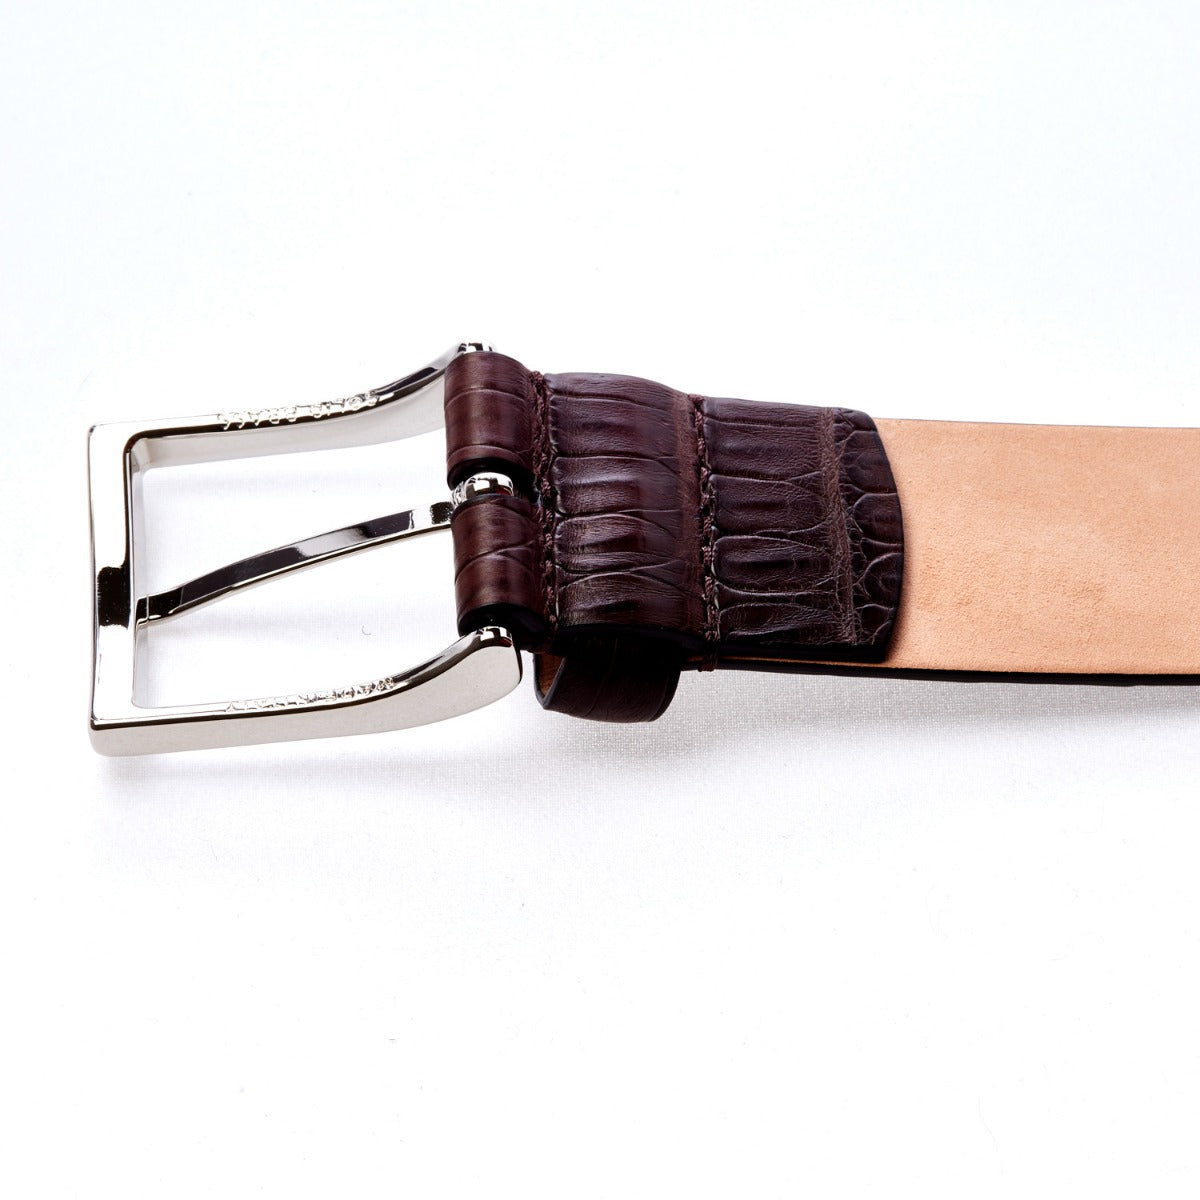 A Sovereign Grade Medium Brown Crocodile Belt with a satin finish, handcrafted in Italy by KirbyAllison.com.